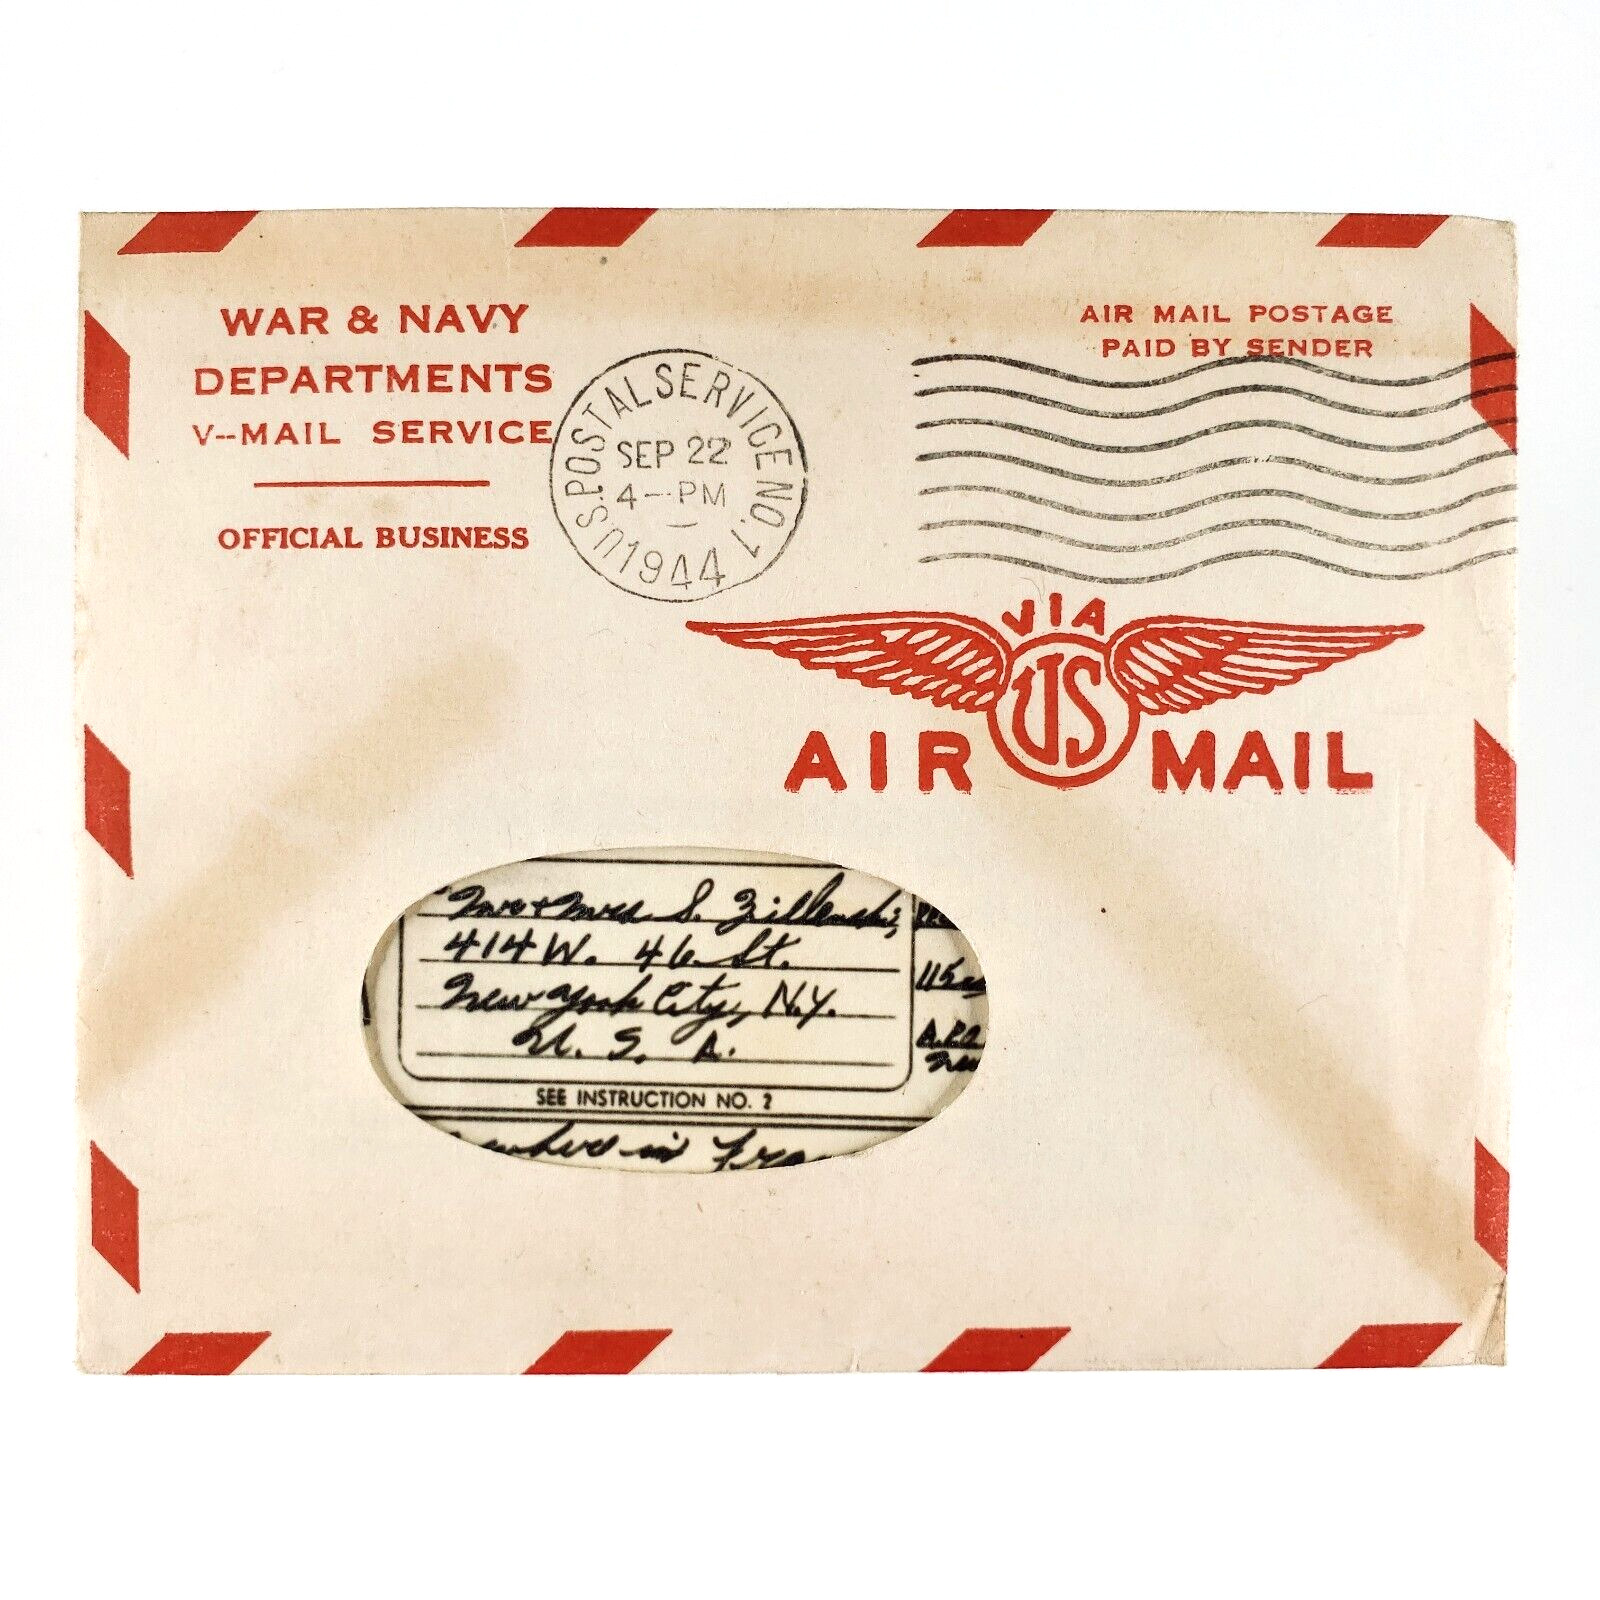 Unopened US Military Air Mail Letter 1940s War & Navy Department Envelope C3394